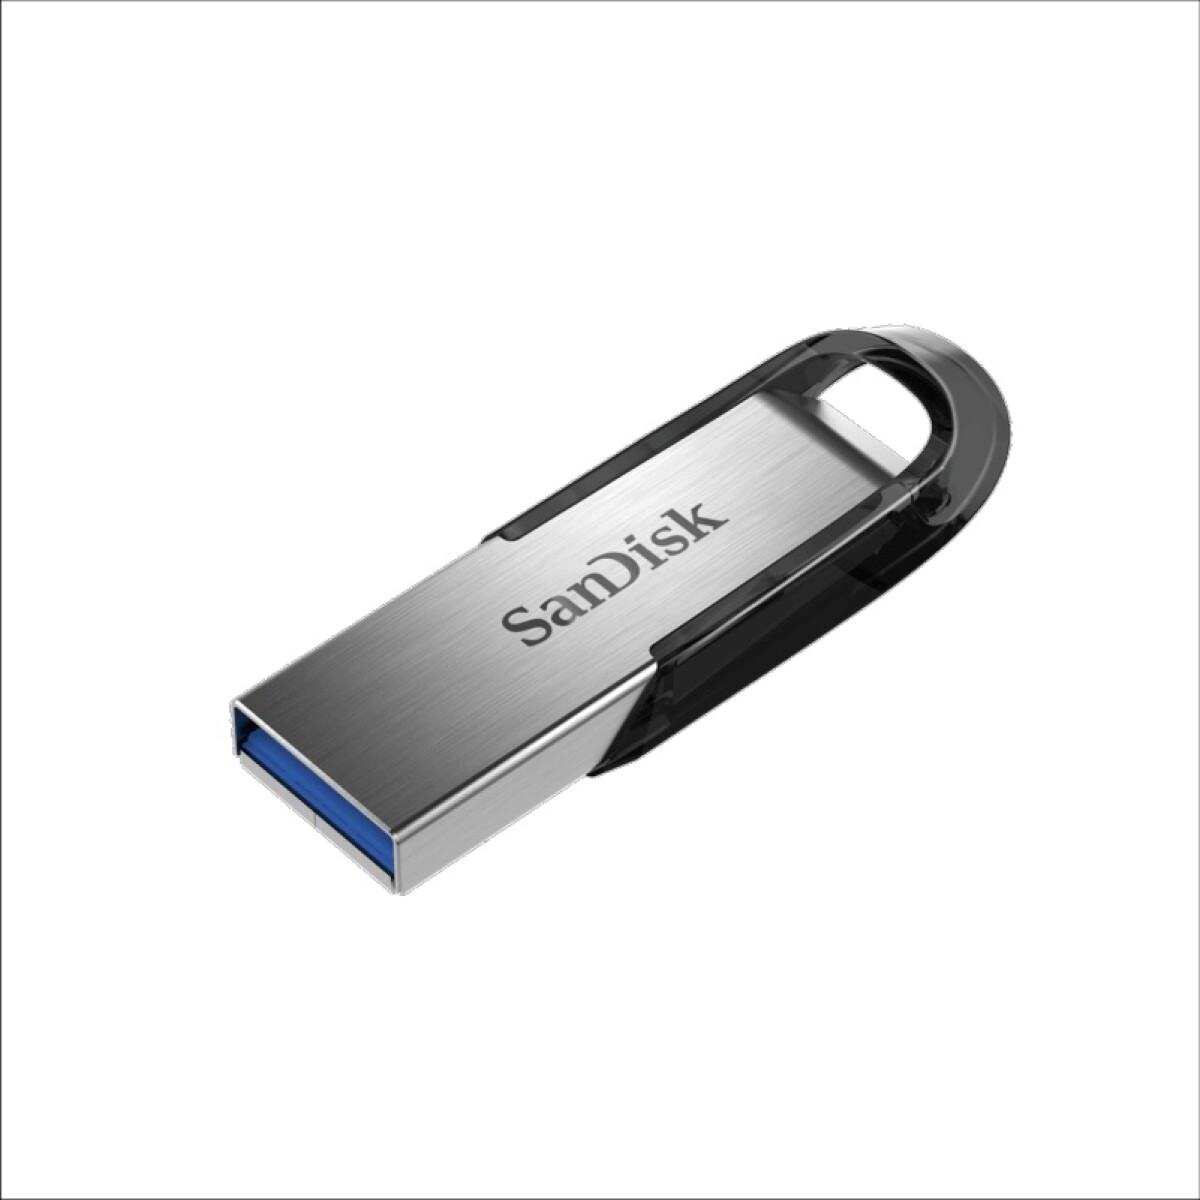 Pendrive SanDisk Ultra Flair 32GB SDCZ73 USB 3.0 